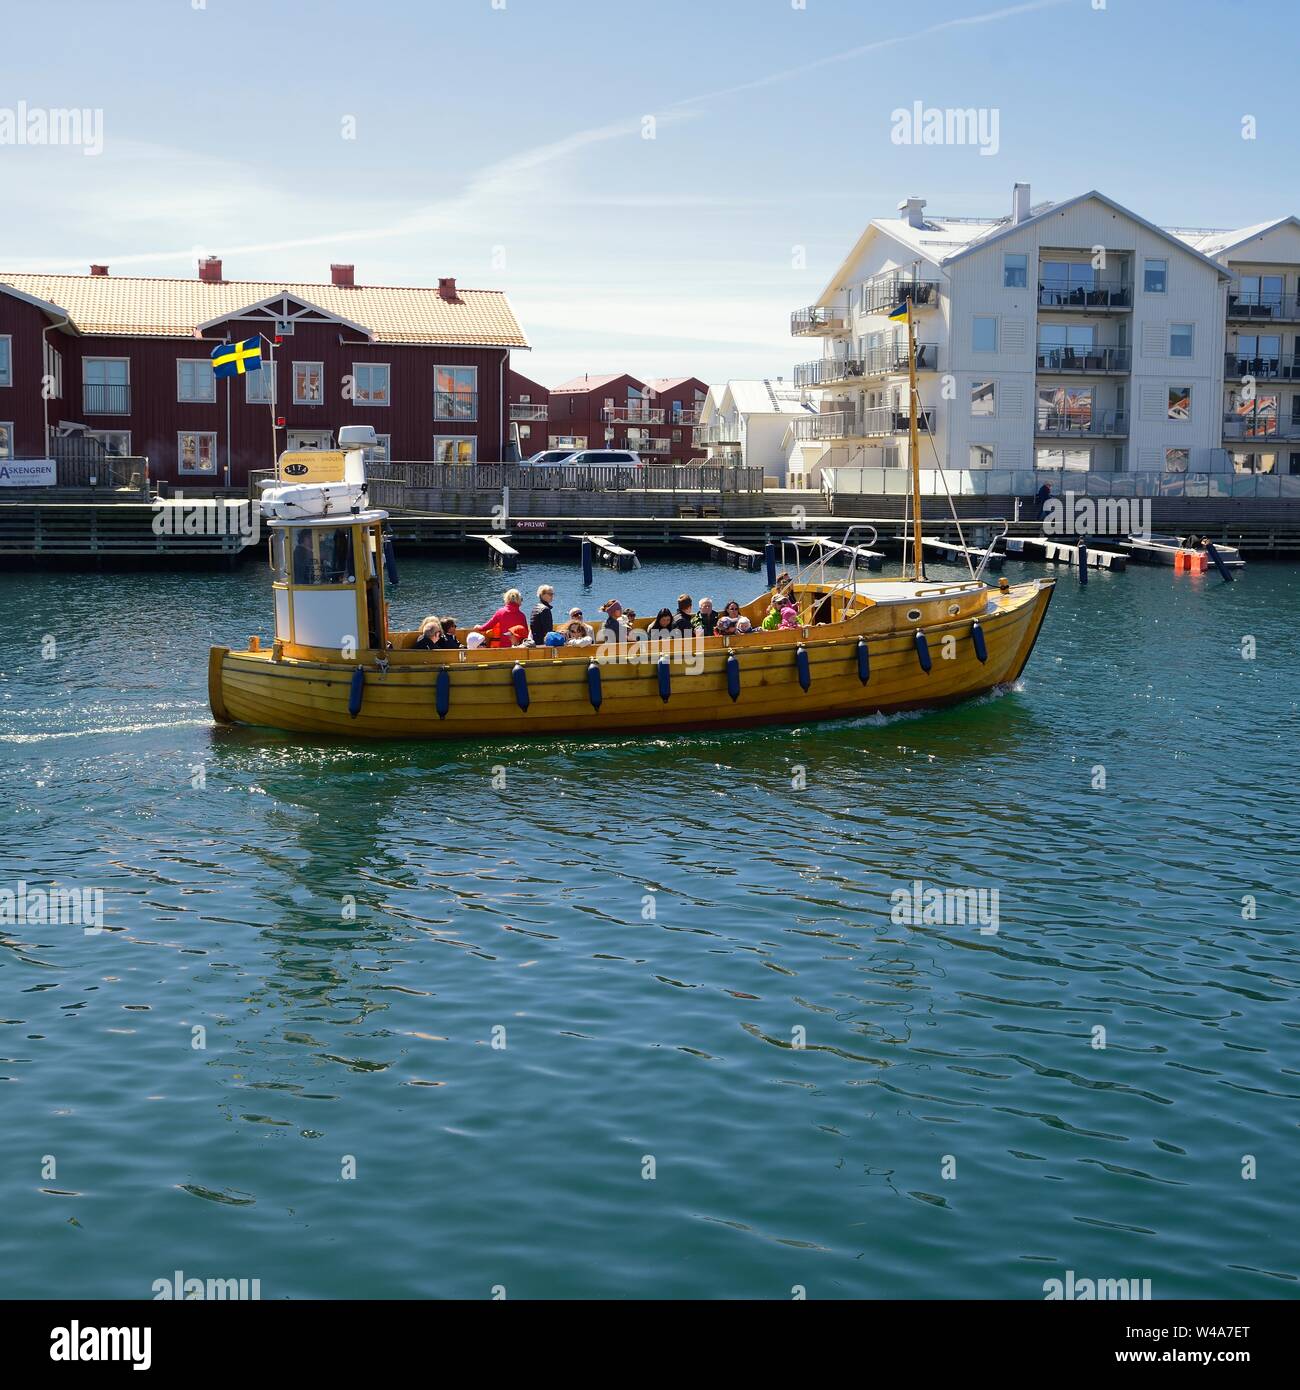 Smogen, Sweden - May 31, 2019: Passenger boat with tourists. Stock Photo